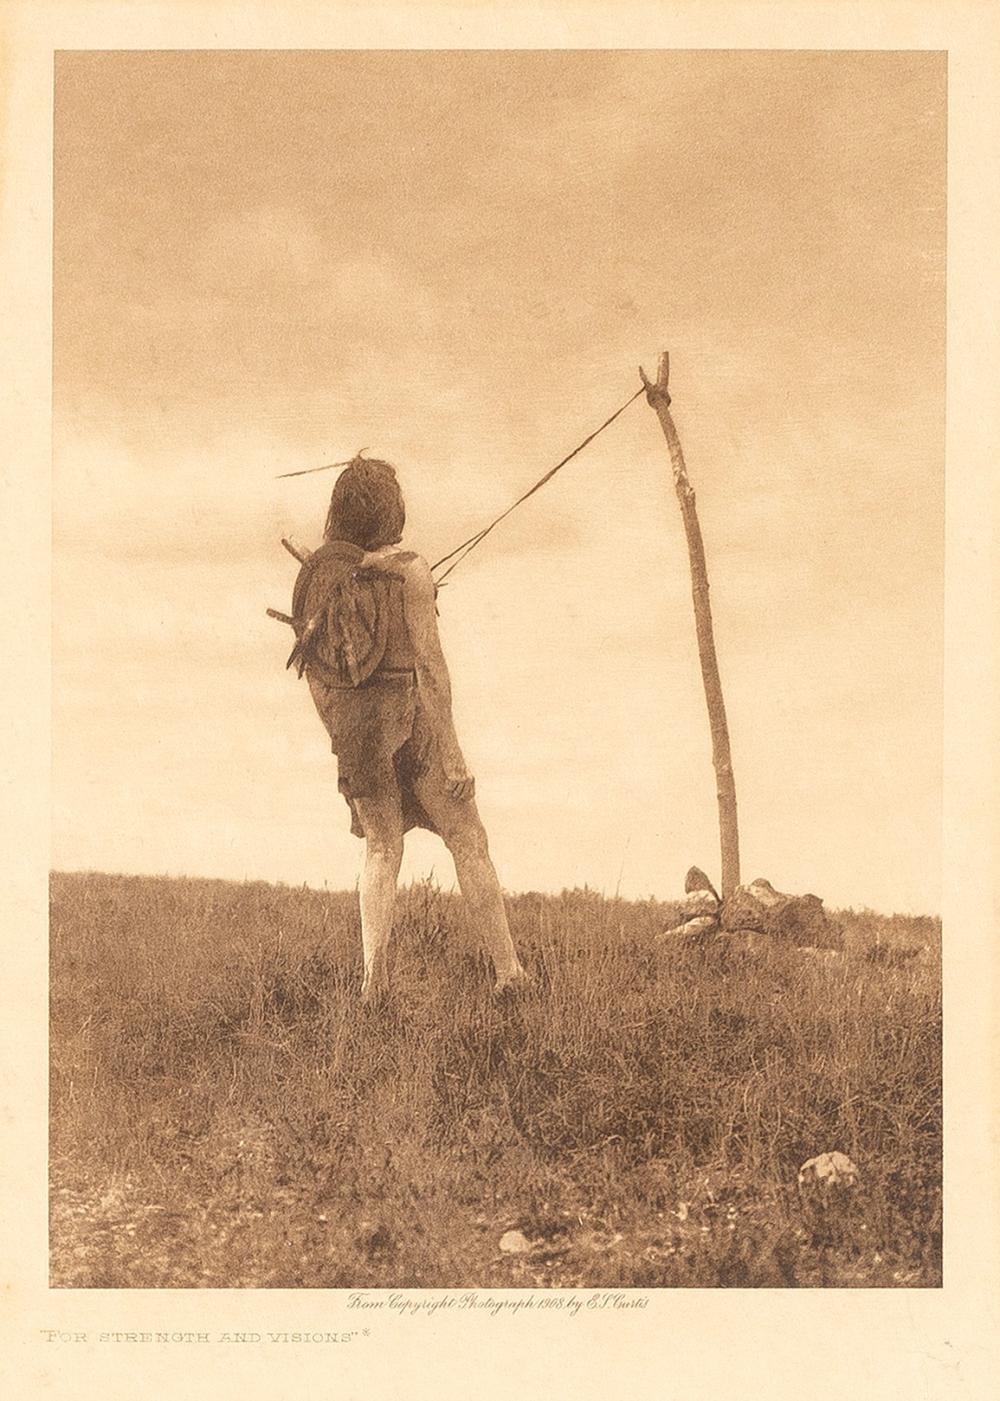 EDWARD S. CURTIS, FOR STRENGTH